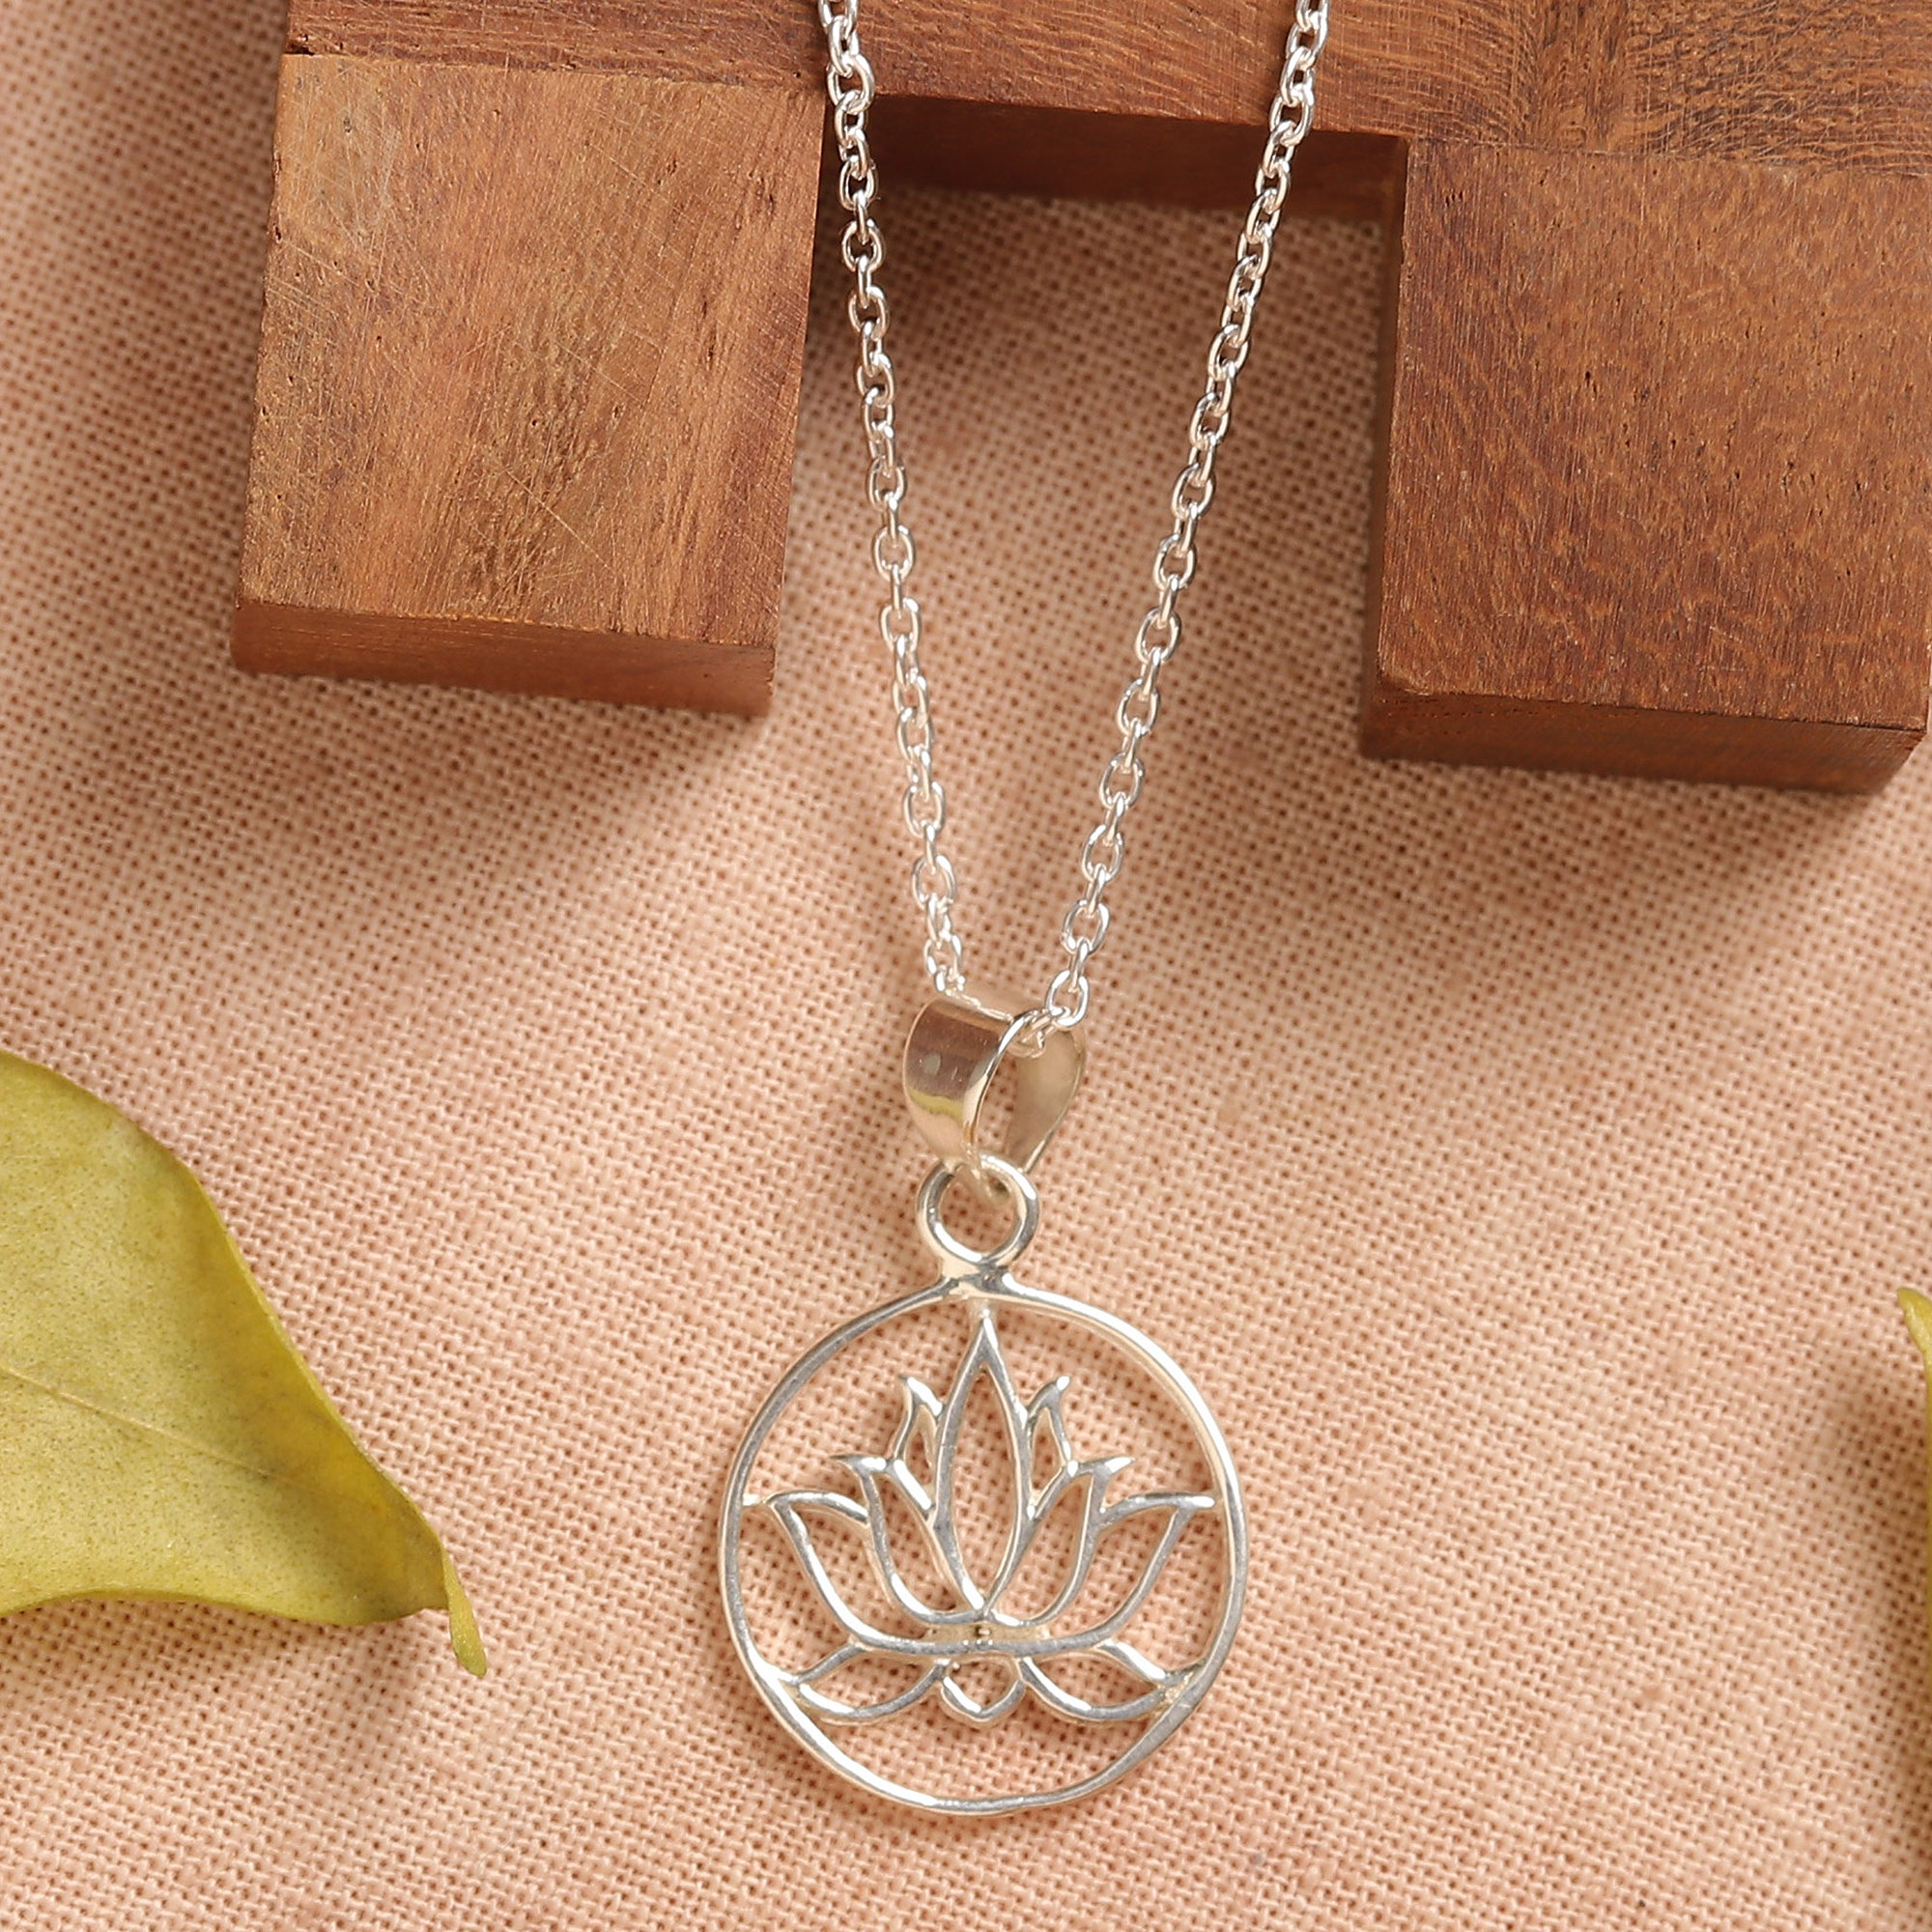 UNICEF Market | Handcrafted Sterling Silver Lotus Bloom Pendant ...